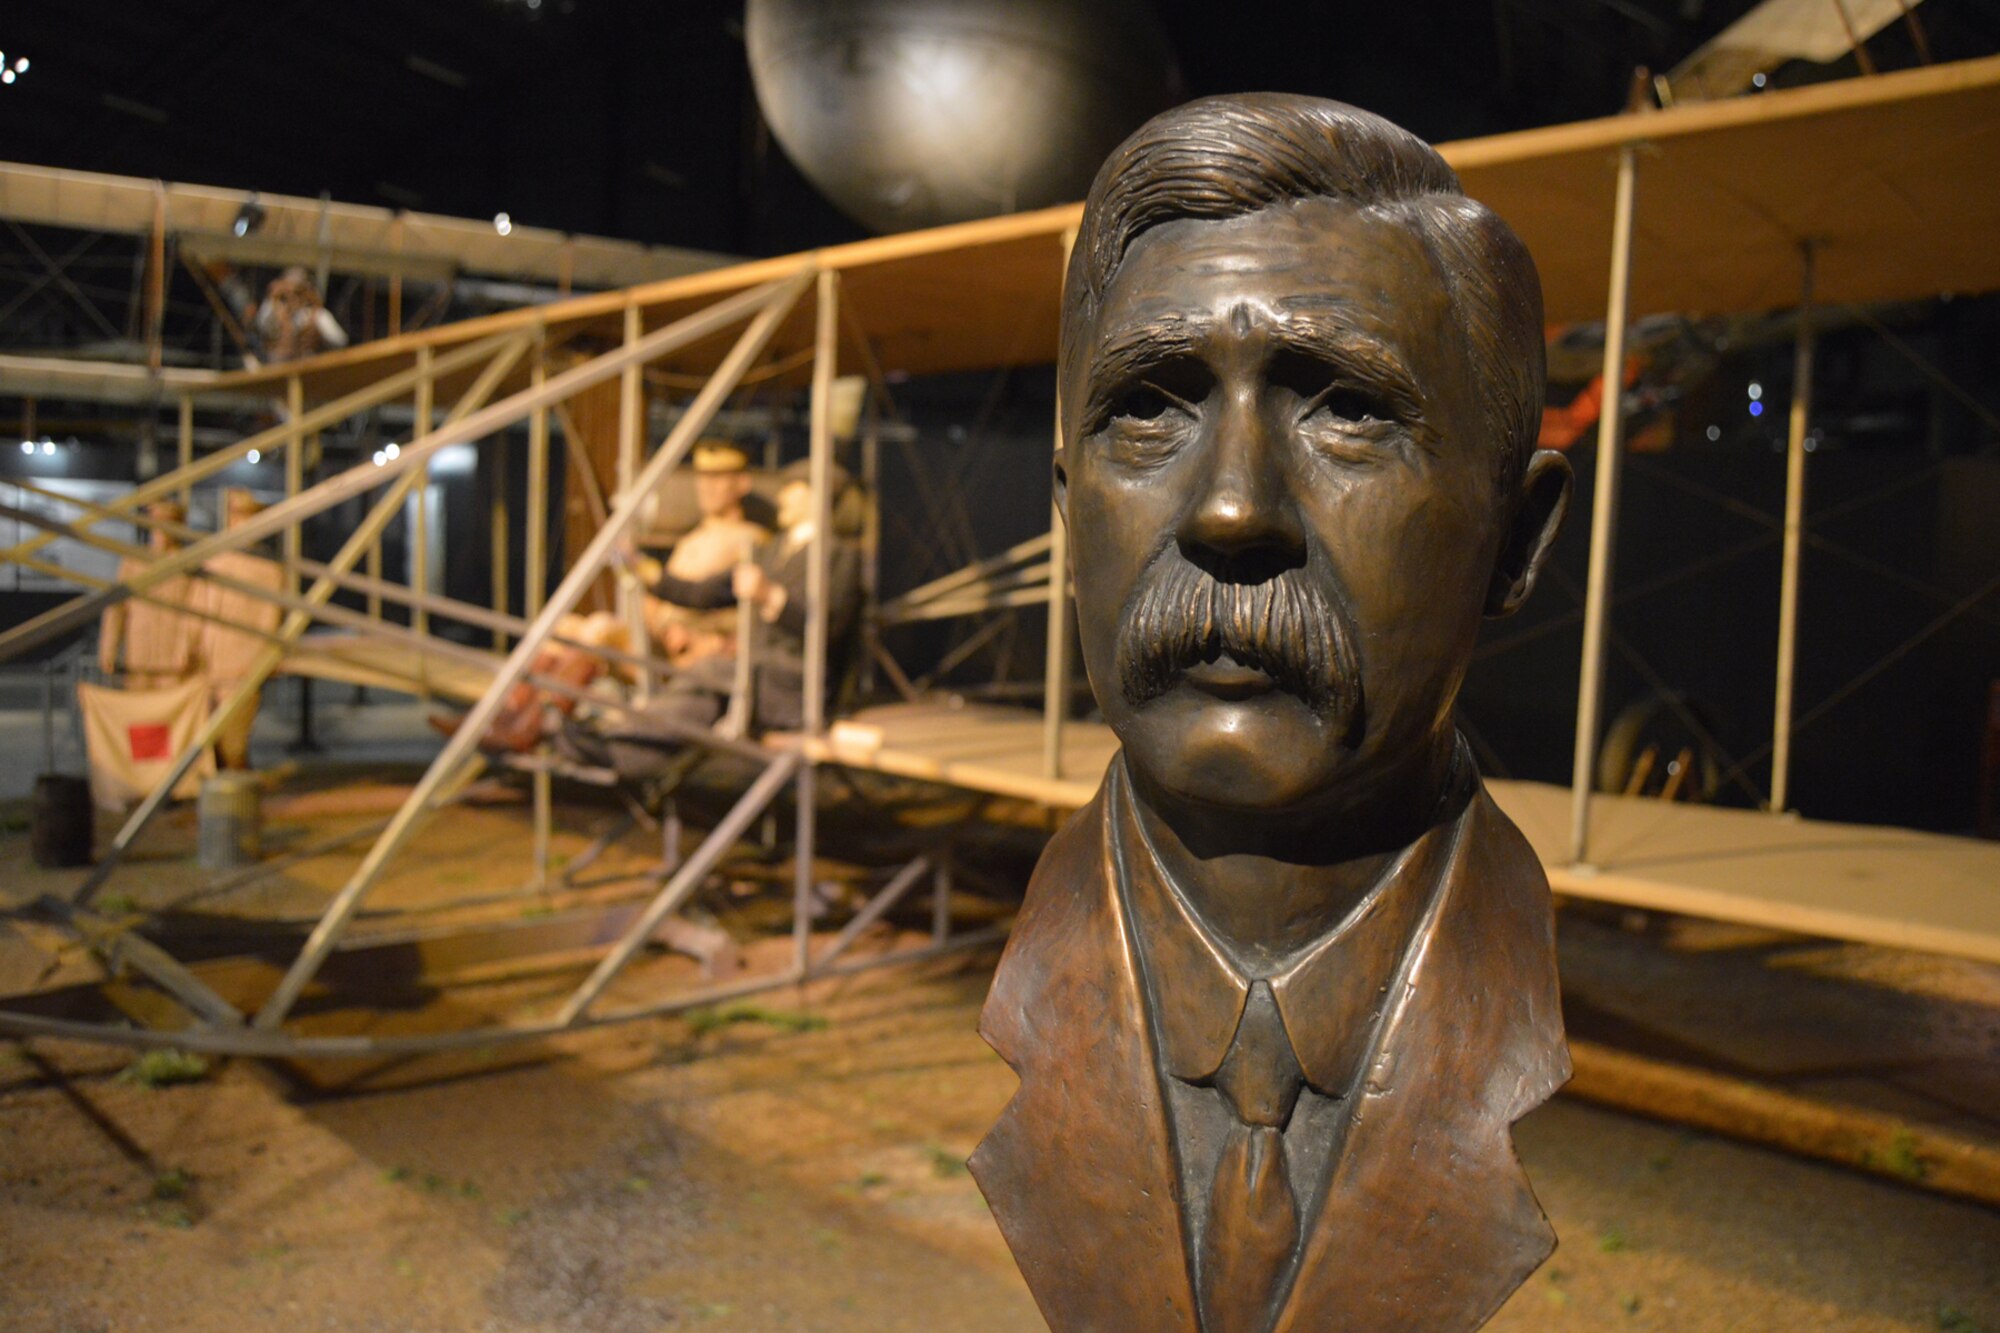 A bronze bust honoring the first aviation mechanic, Charles E. Taylor, is now on permanent display in the National Museum of the U.S. Air Force's Early Years Gallery. The museum is located near Dayton, Ohio. Taylor designed and built the engine that made the Wright brother’s pioneering powered flights possible. (U.S. Air Force photo/Ken LaRock)